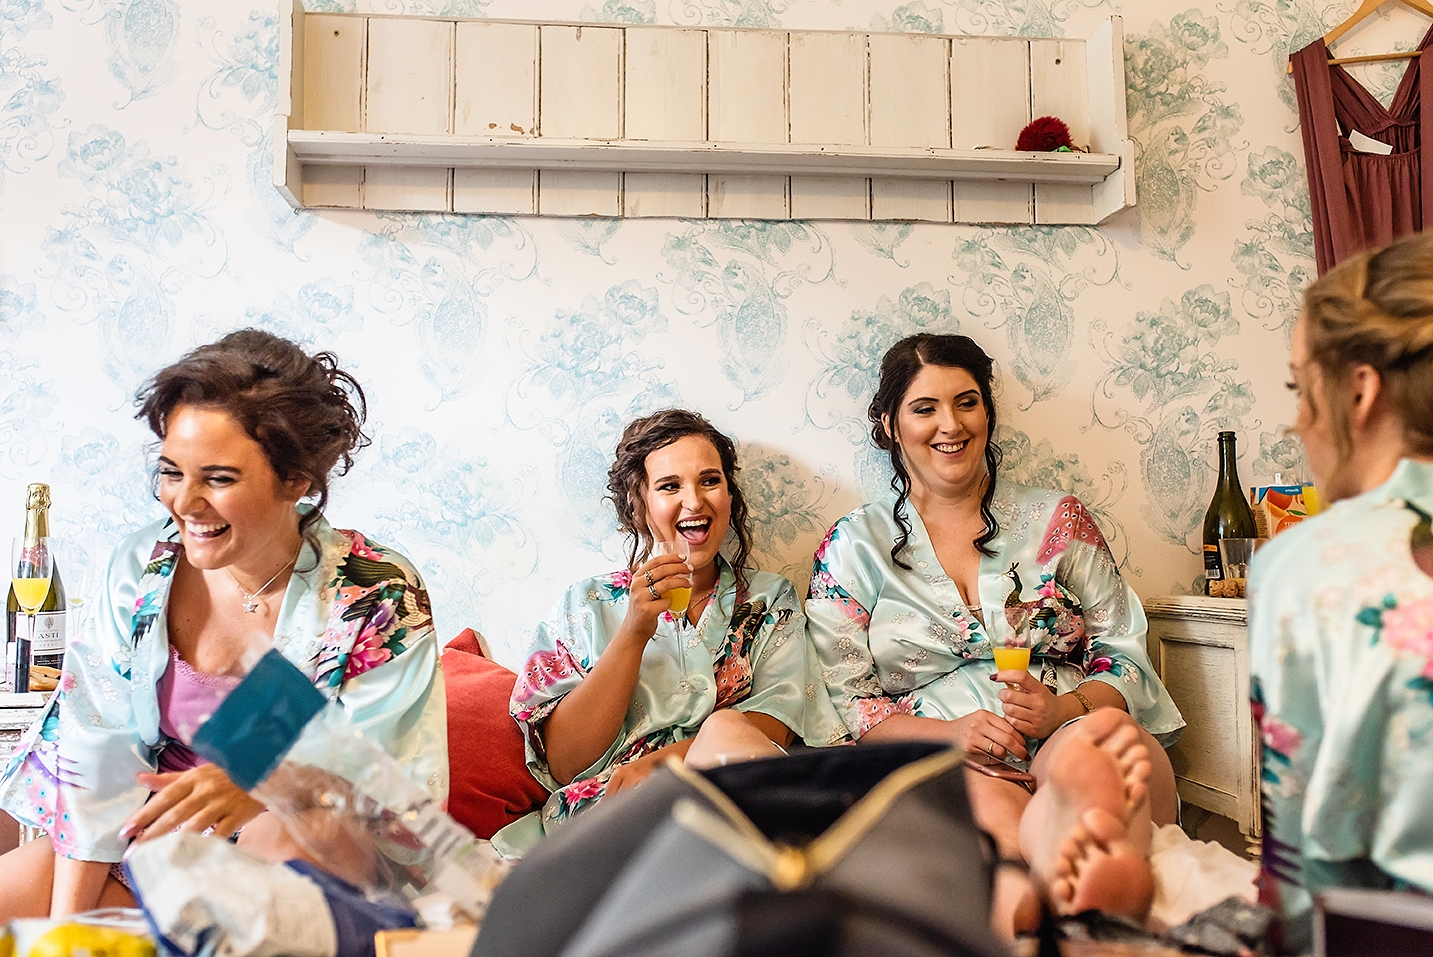 Bridesmaids in their dressing gown toasting during wedding preparation